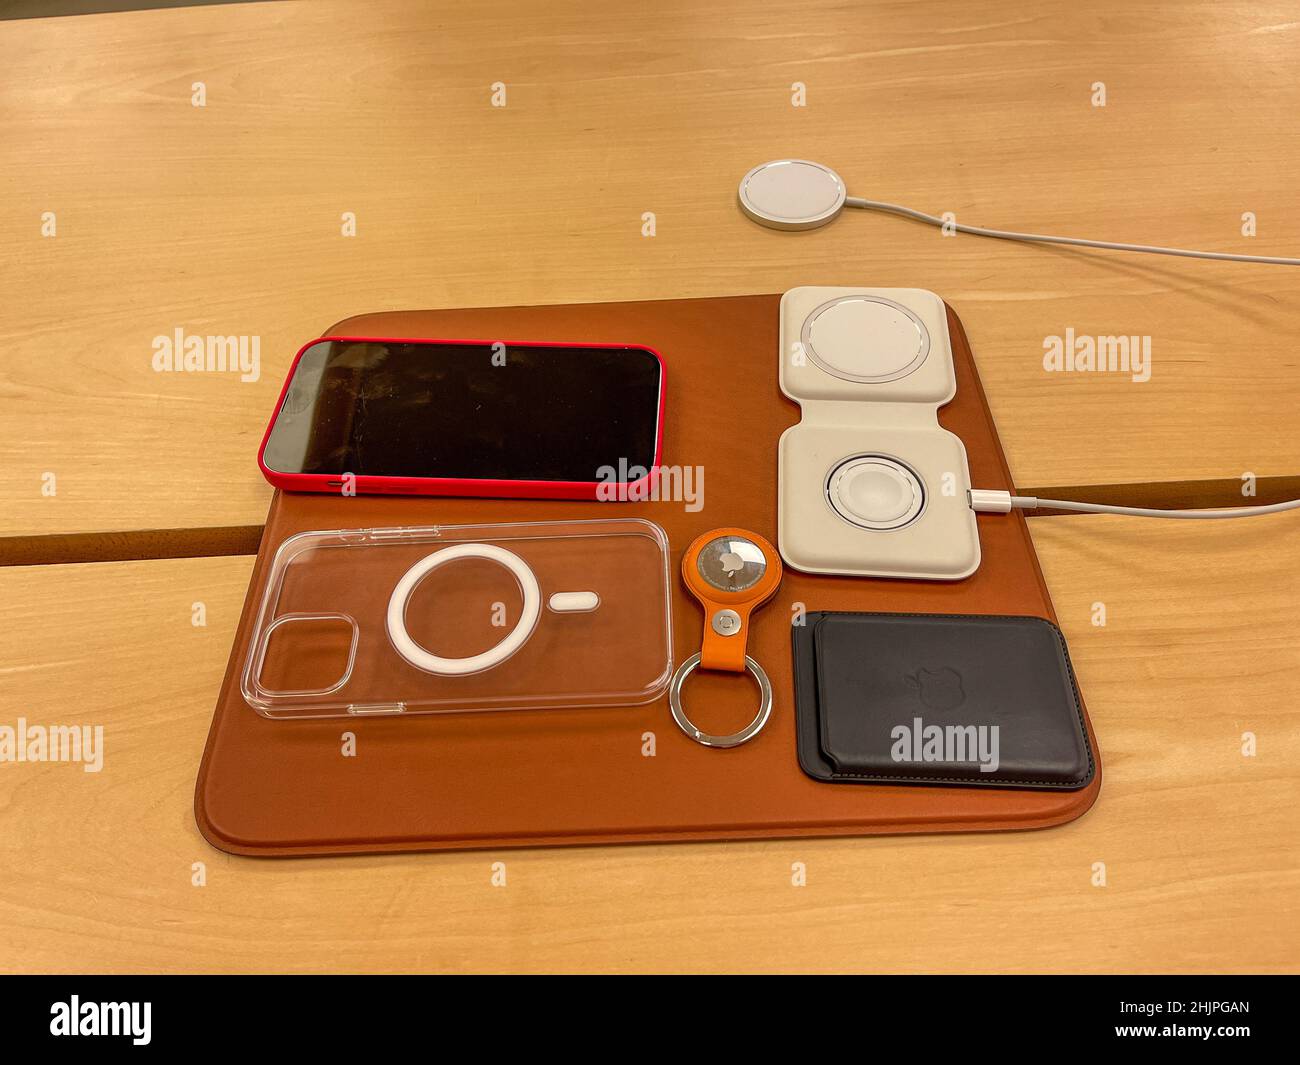 Orlando, FL/USA-12/6/19: An Apple store display of Photography Accessories  for customers to purchase Stock Photo - Alamy